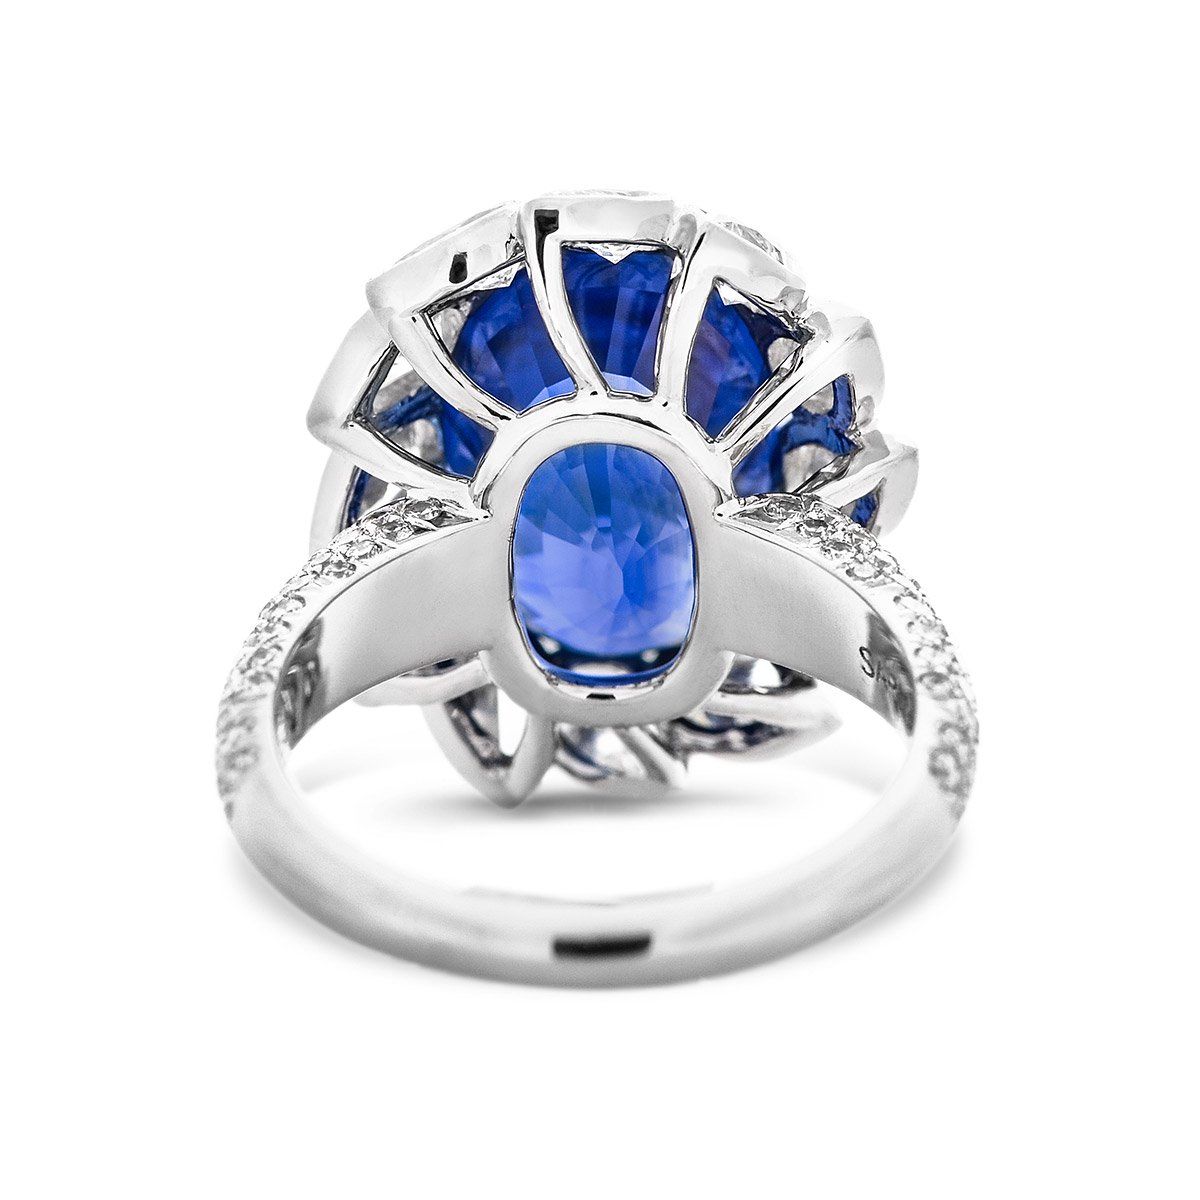 Natural Blue Sri-Lanka Sapphire Ring, 12.94 Ct. (16.64 Ct. TW), GRS Certified, GRS2013-030755T, Unheated